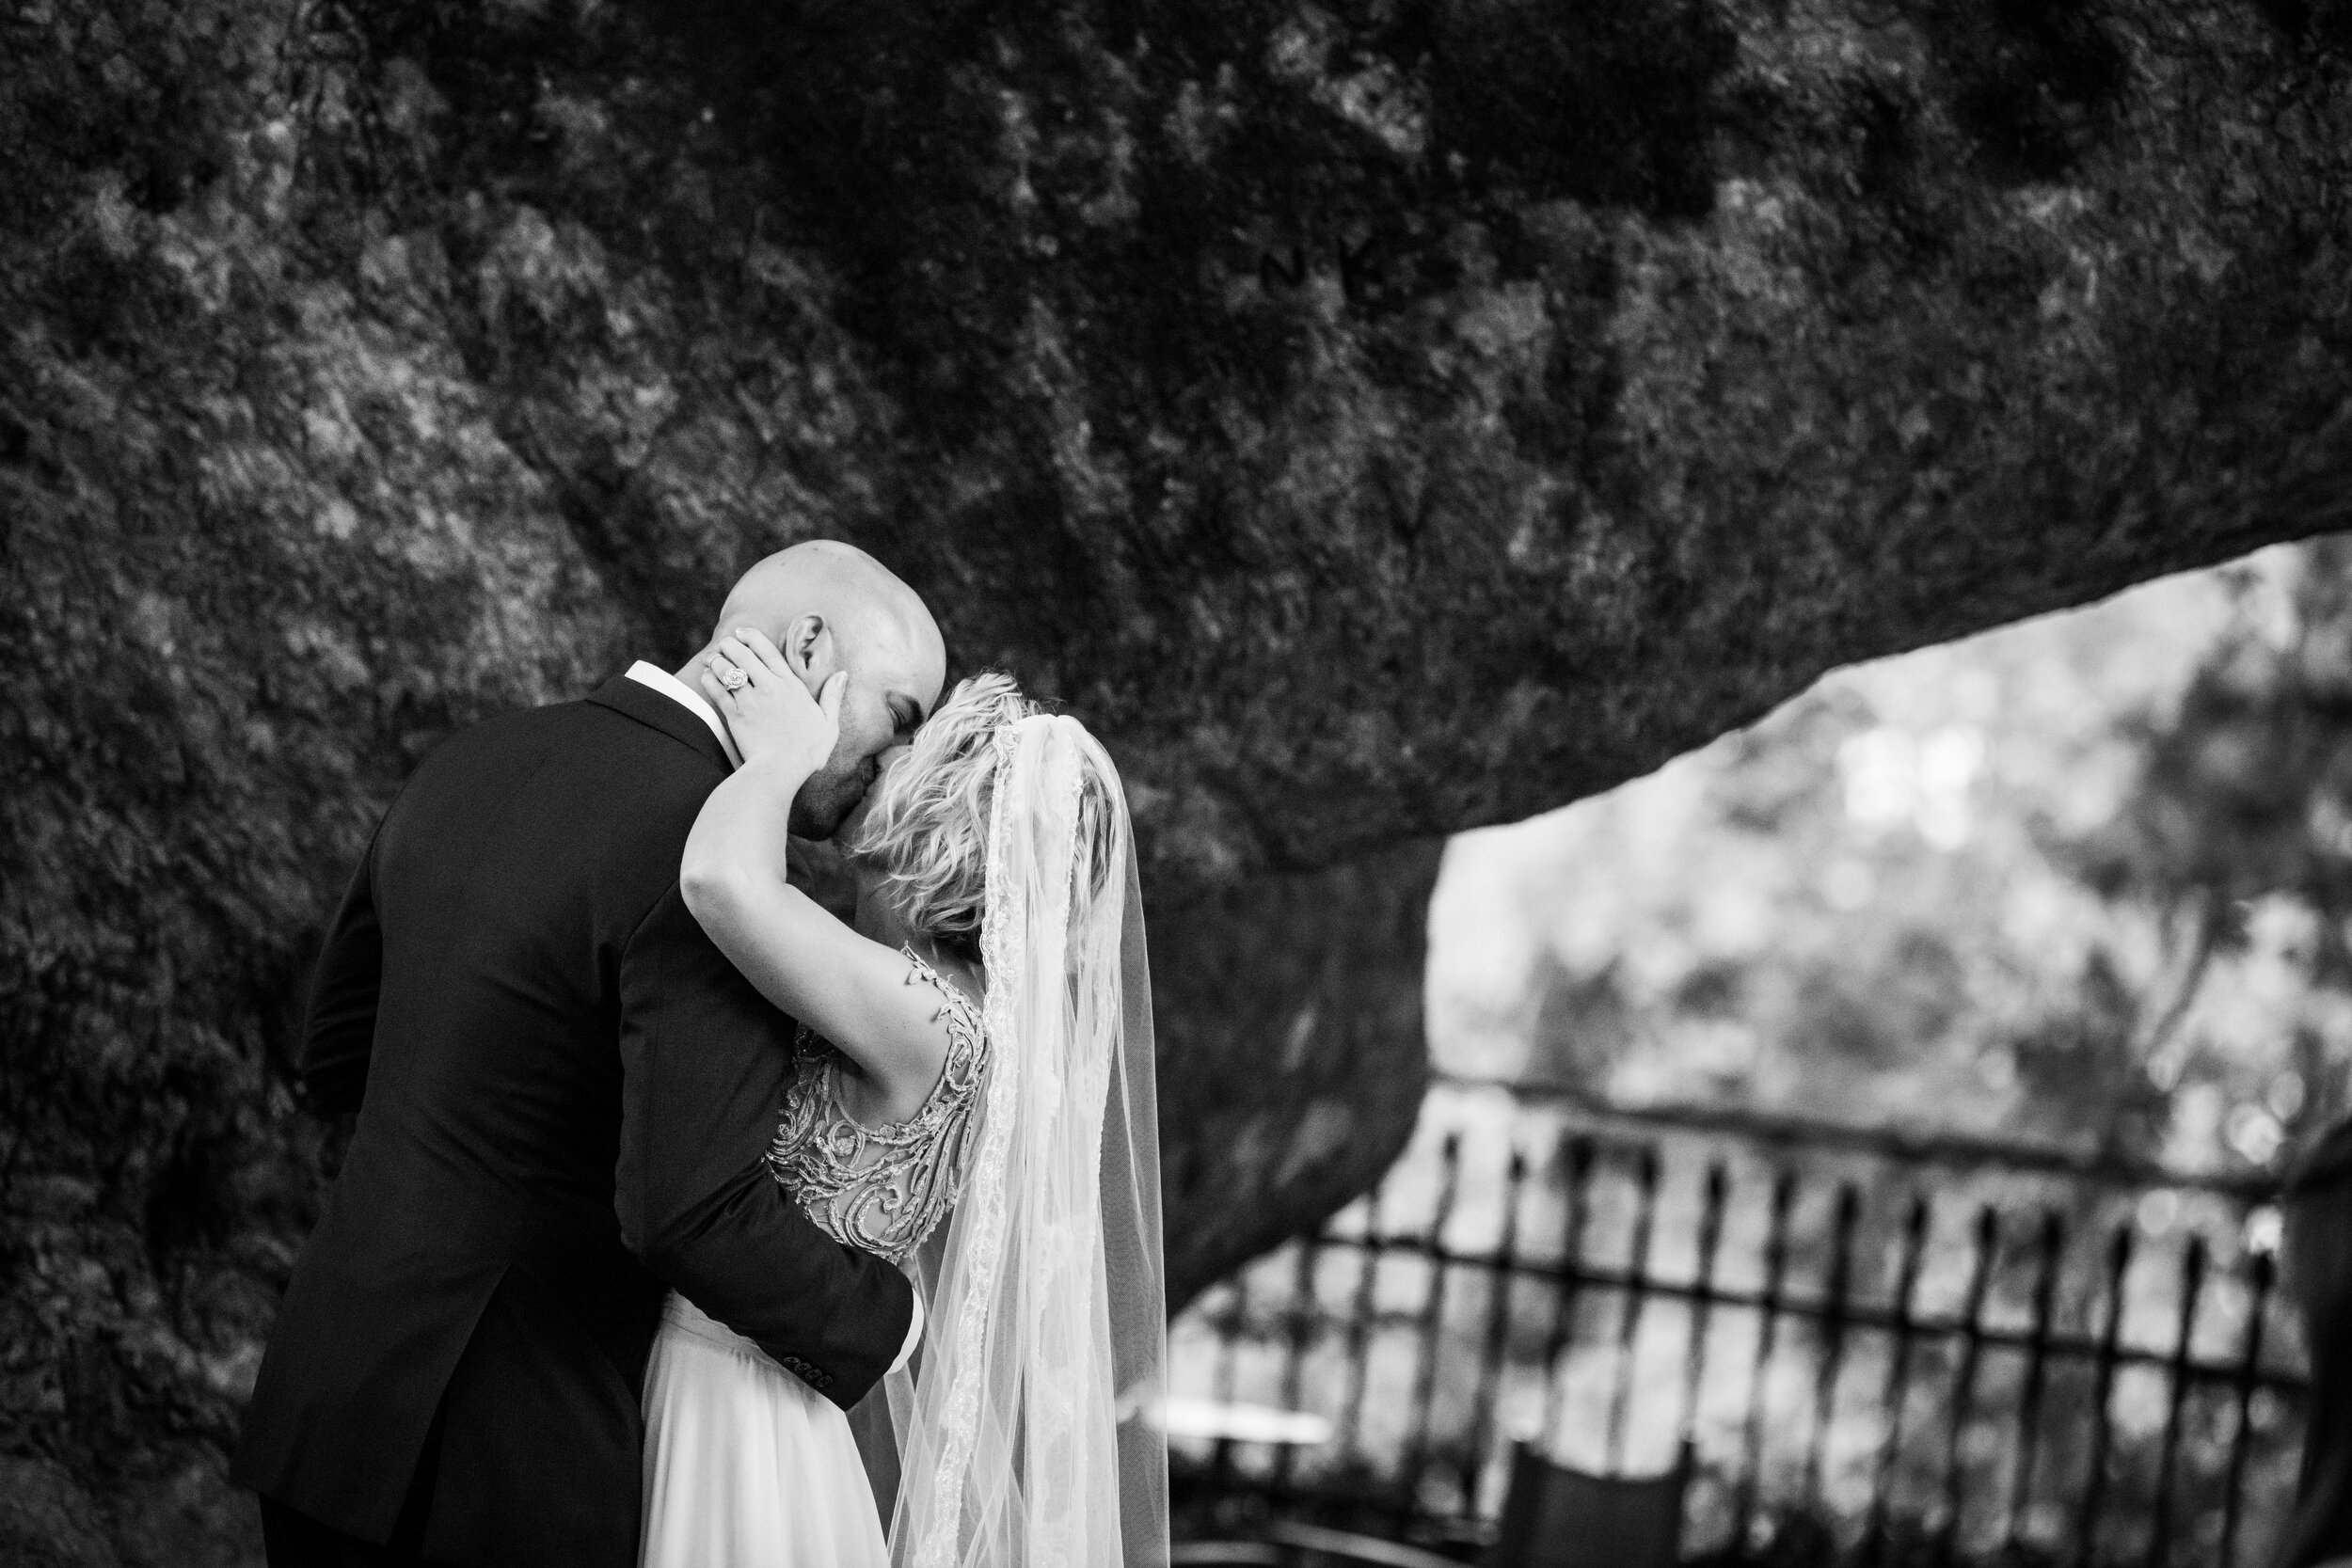 Bride and groom first kiss:  destination wedding photo at the Lost Unicorn Hotel, Tsagarada, Greece by J. Brown Photography.